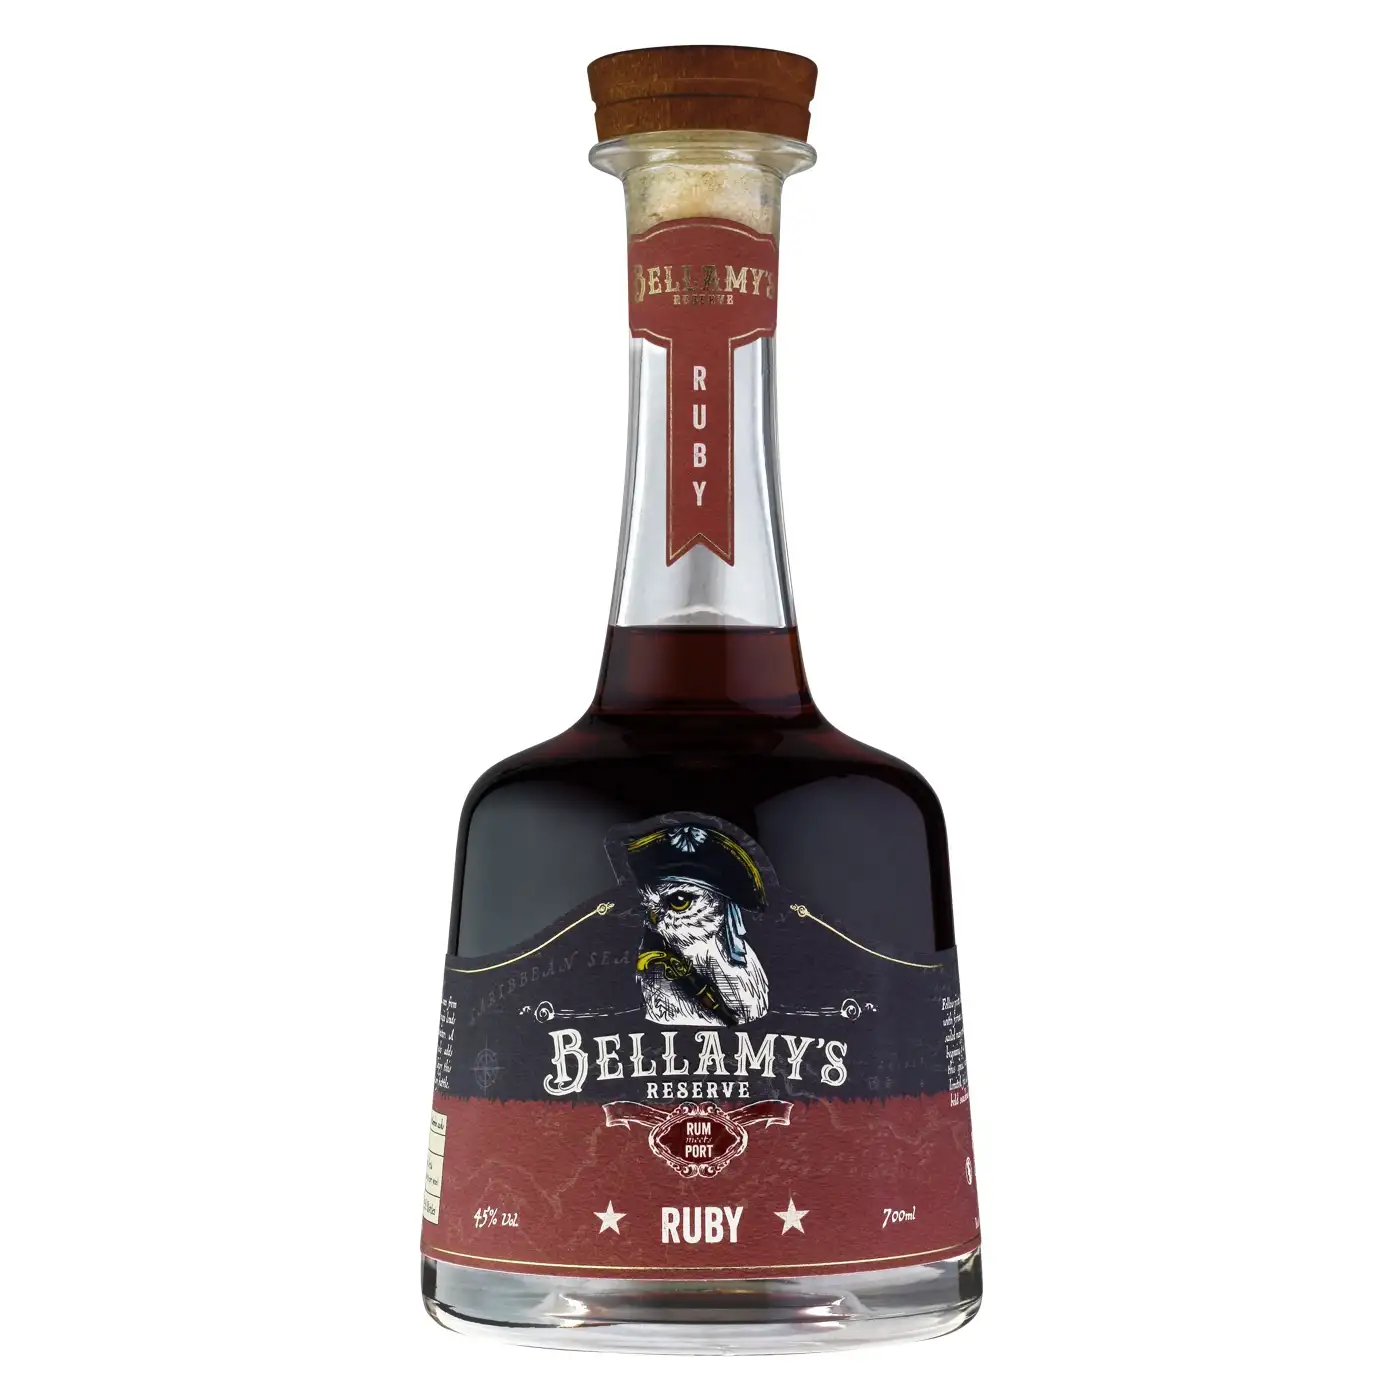 Image of the front of the bottle of the rum Bellamy‘s Reserve Ruby Rum Meets Port